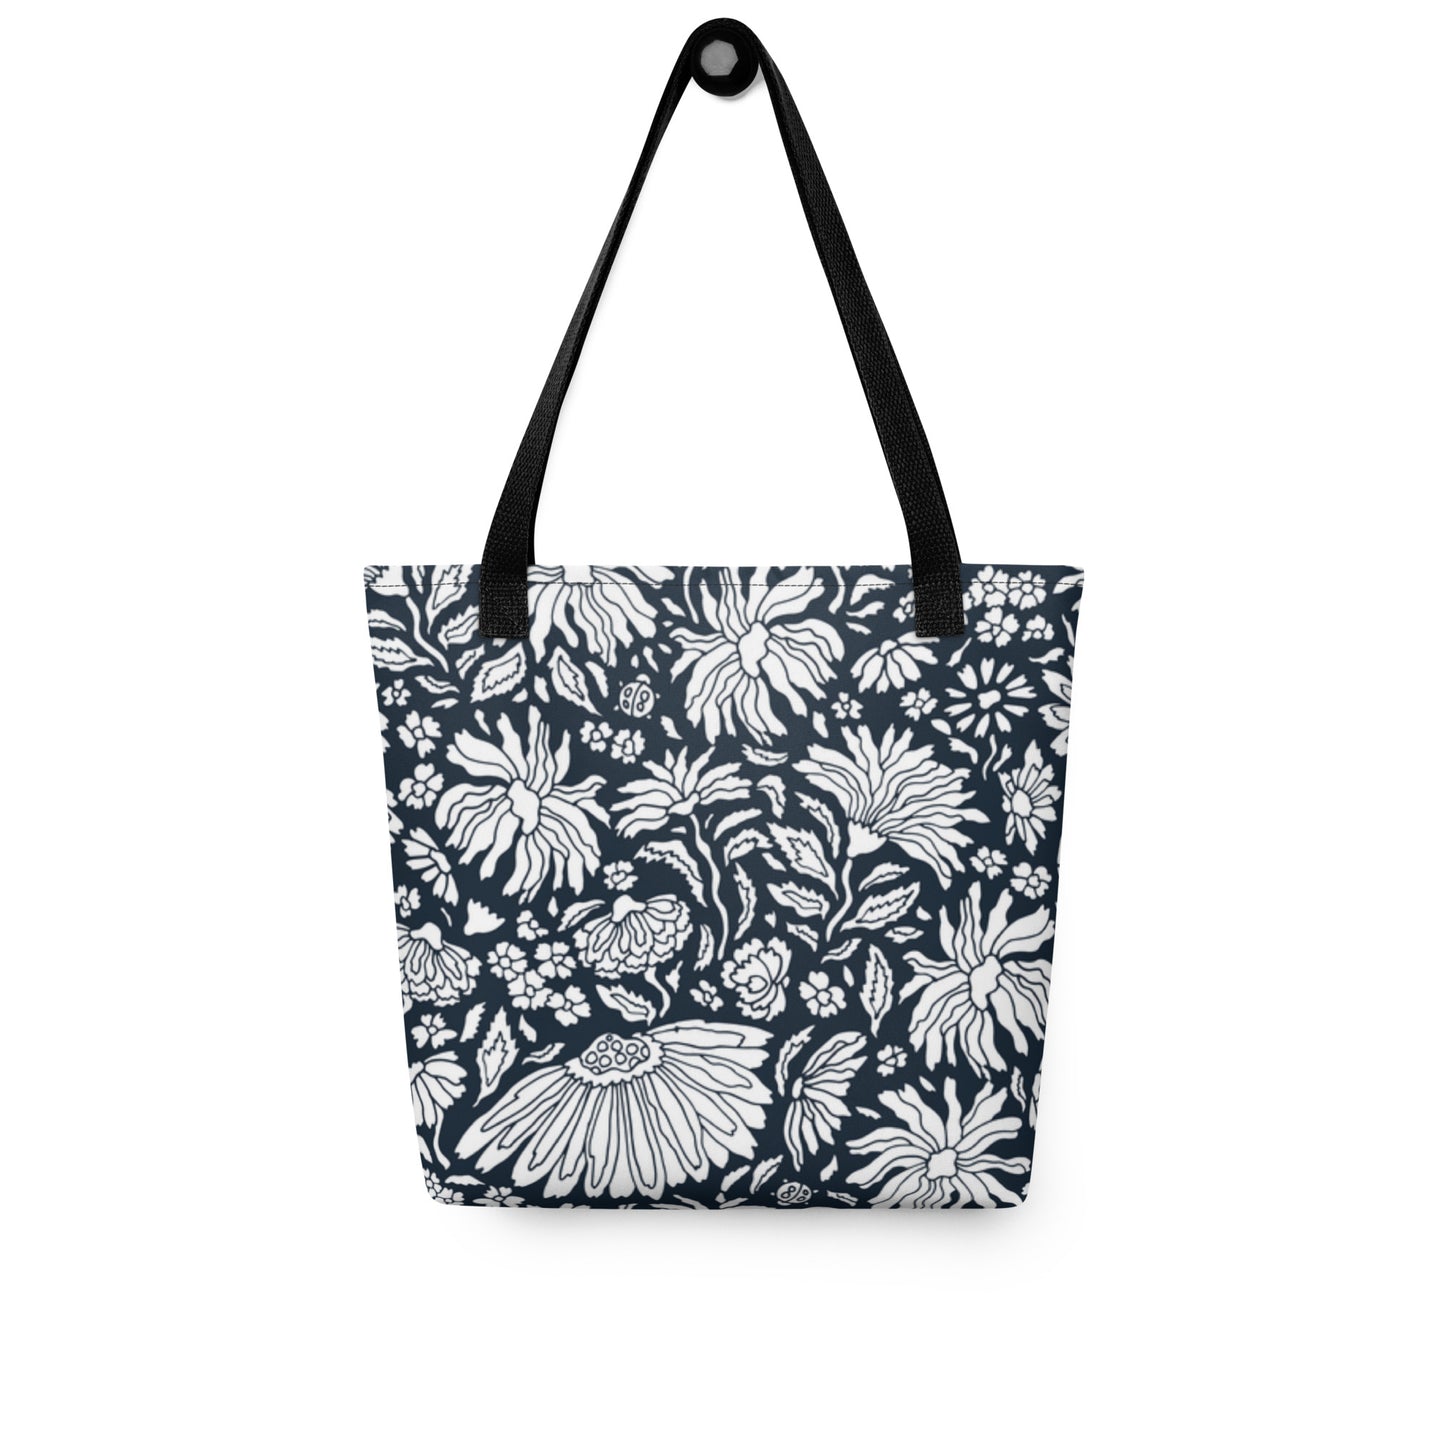 Premium Polyester Tote Bag - Scatter Spring Flowers Print